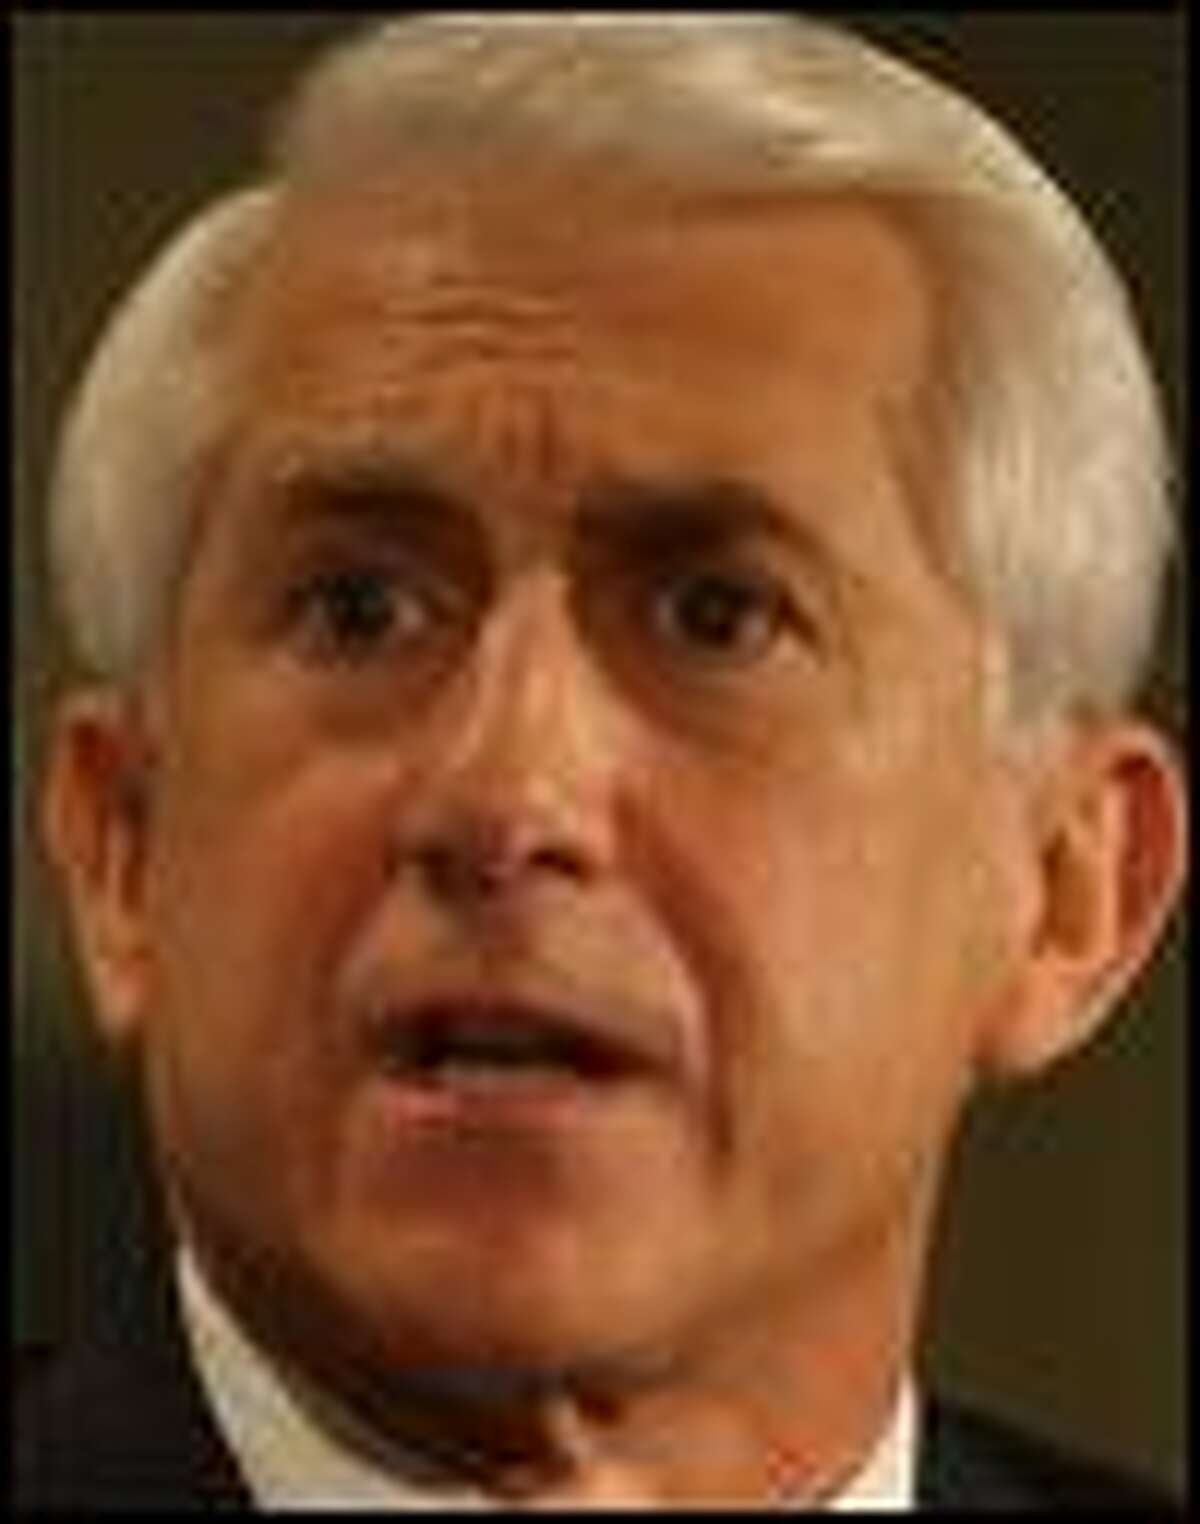 Voters in Rep. Dave Reichert's district will receive Democratic phone calls, e-mails and texts about his vote.